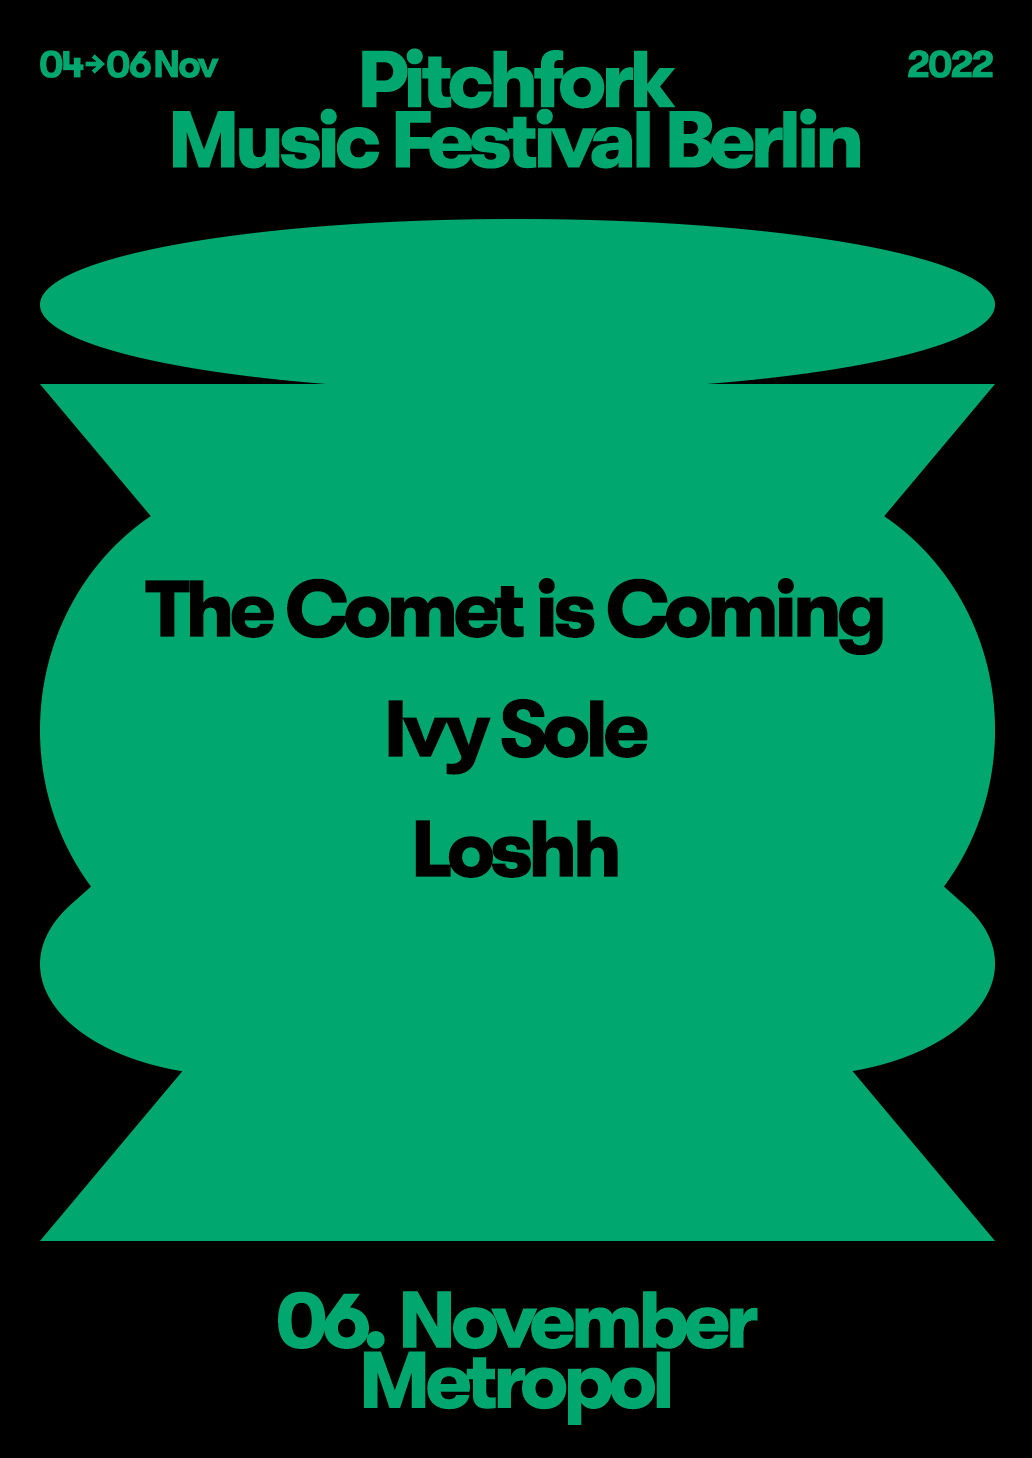 Pitchfork Music Festival The Comet is Coming Ivy Sole Loshh